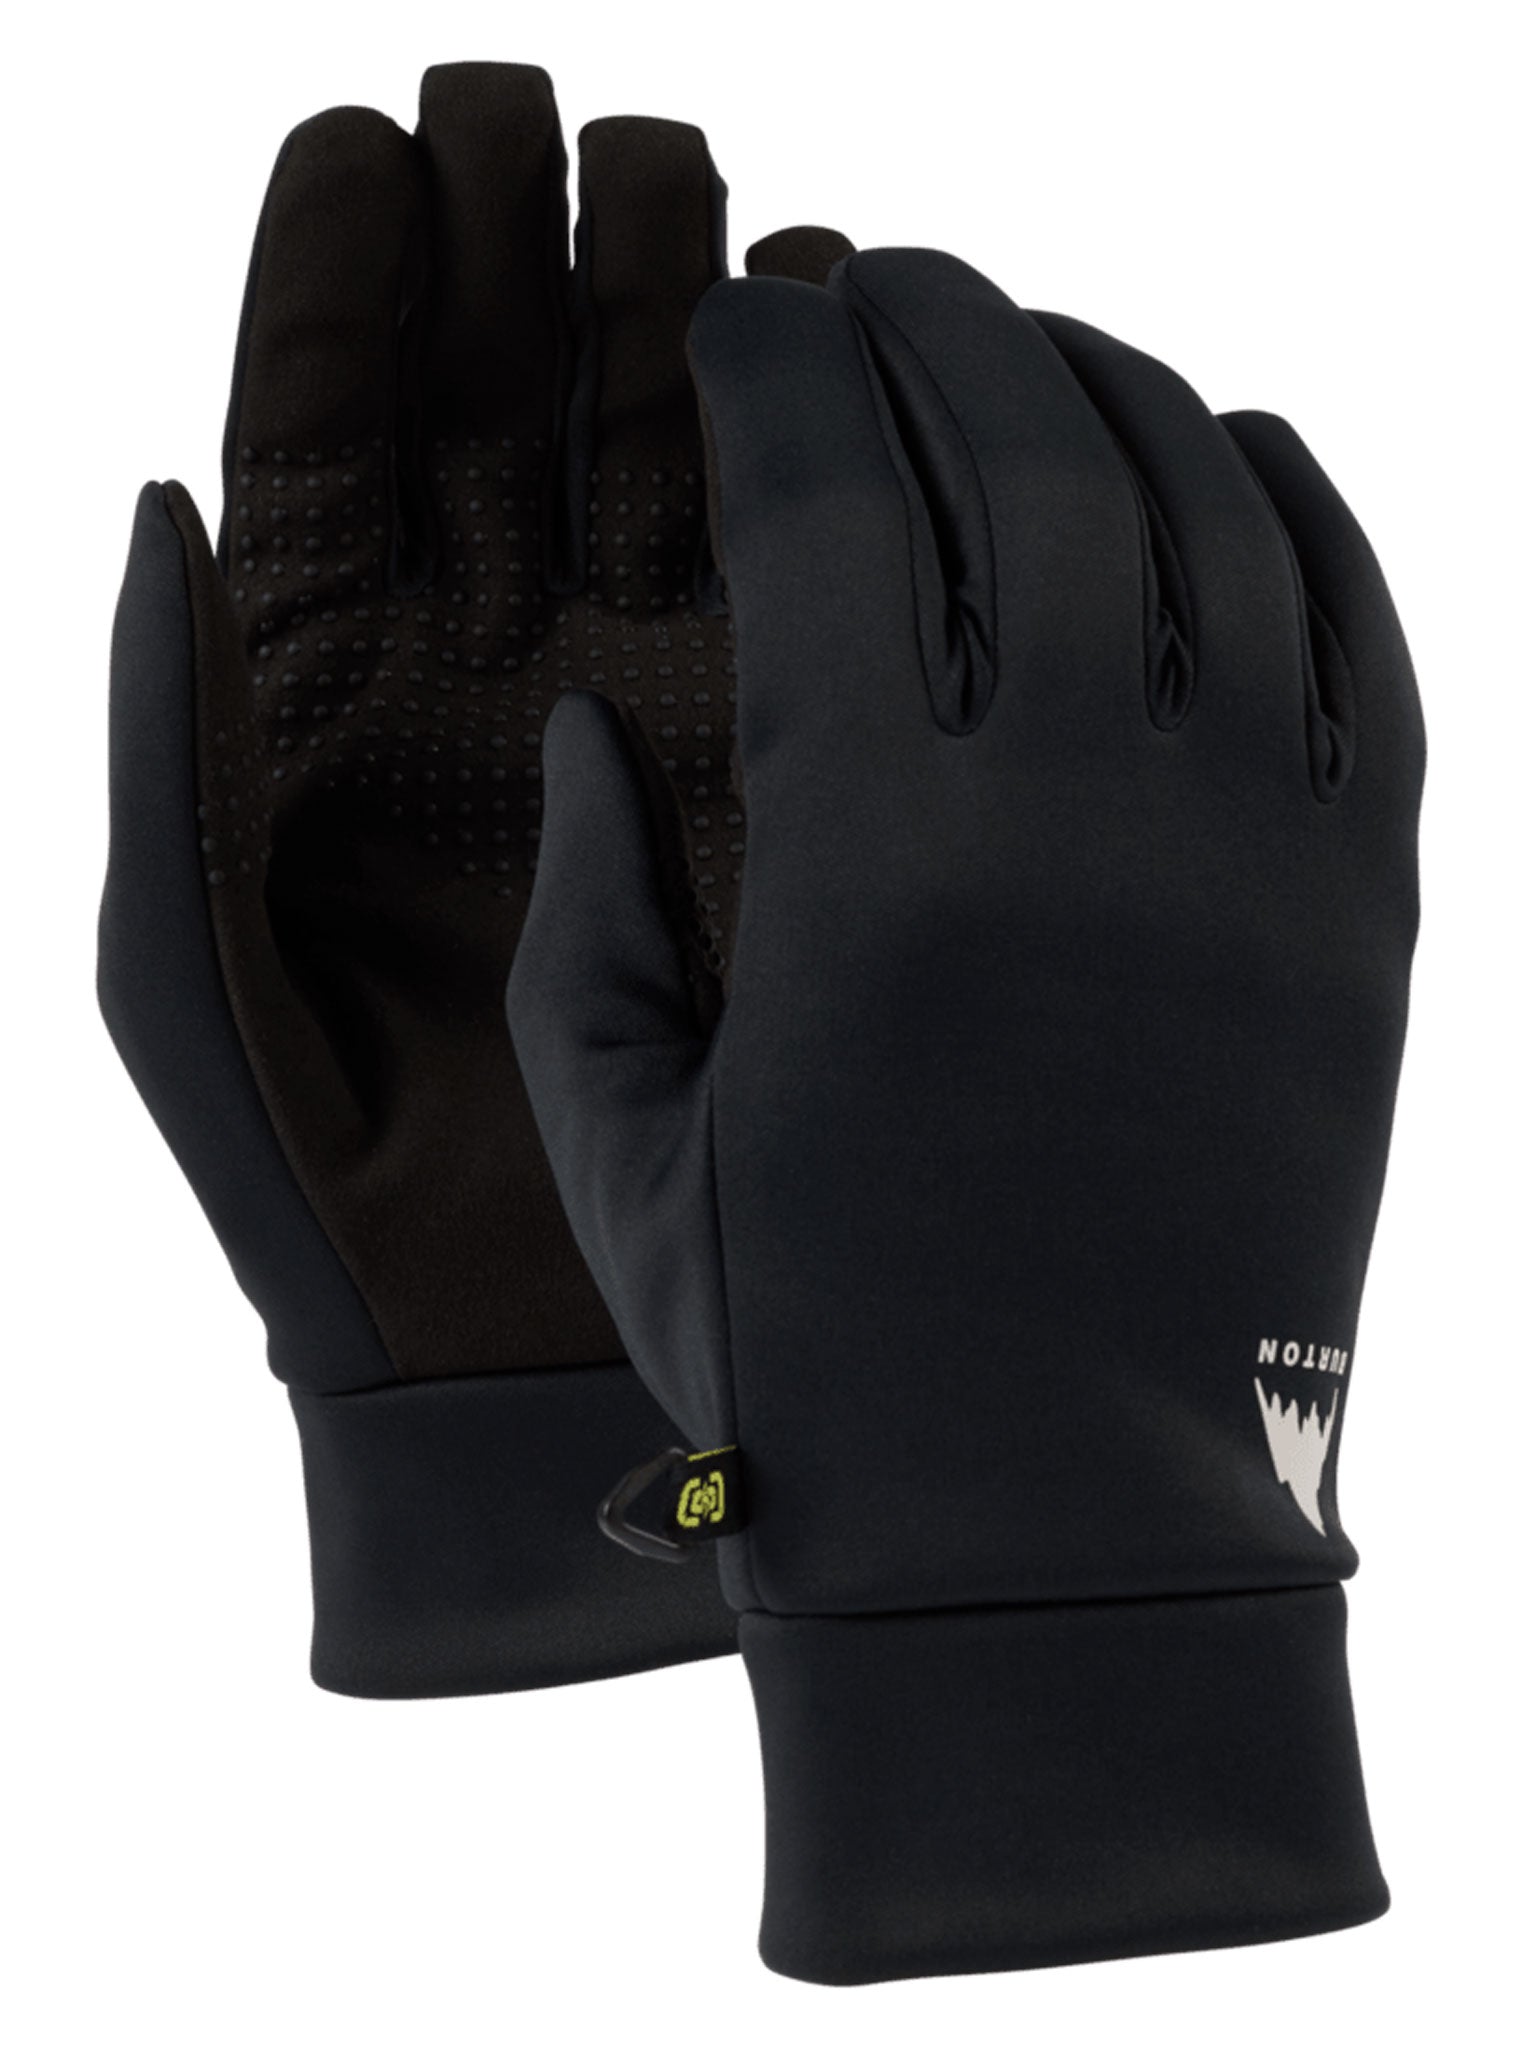 Men's Touch-N-Go Glove Liners